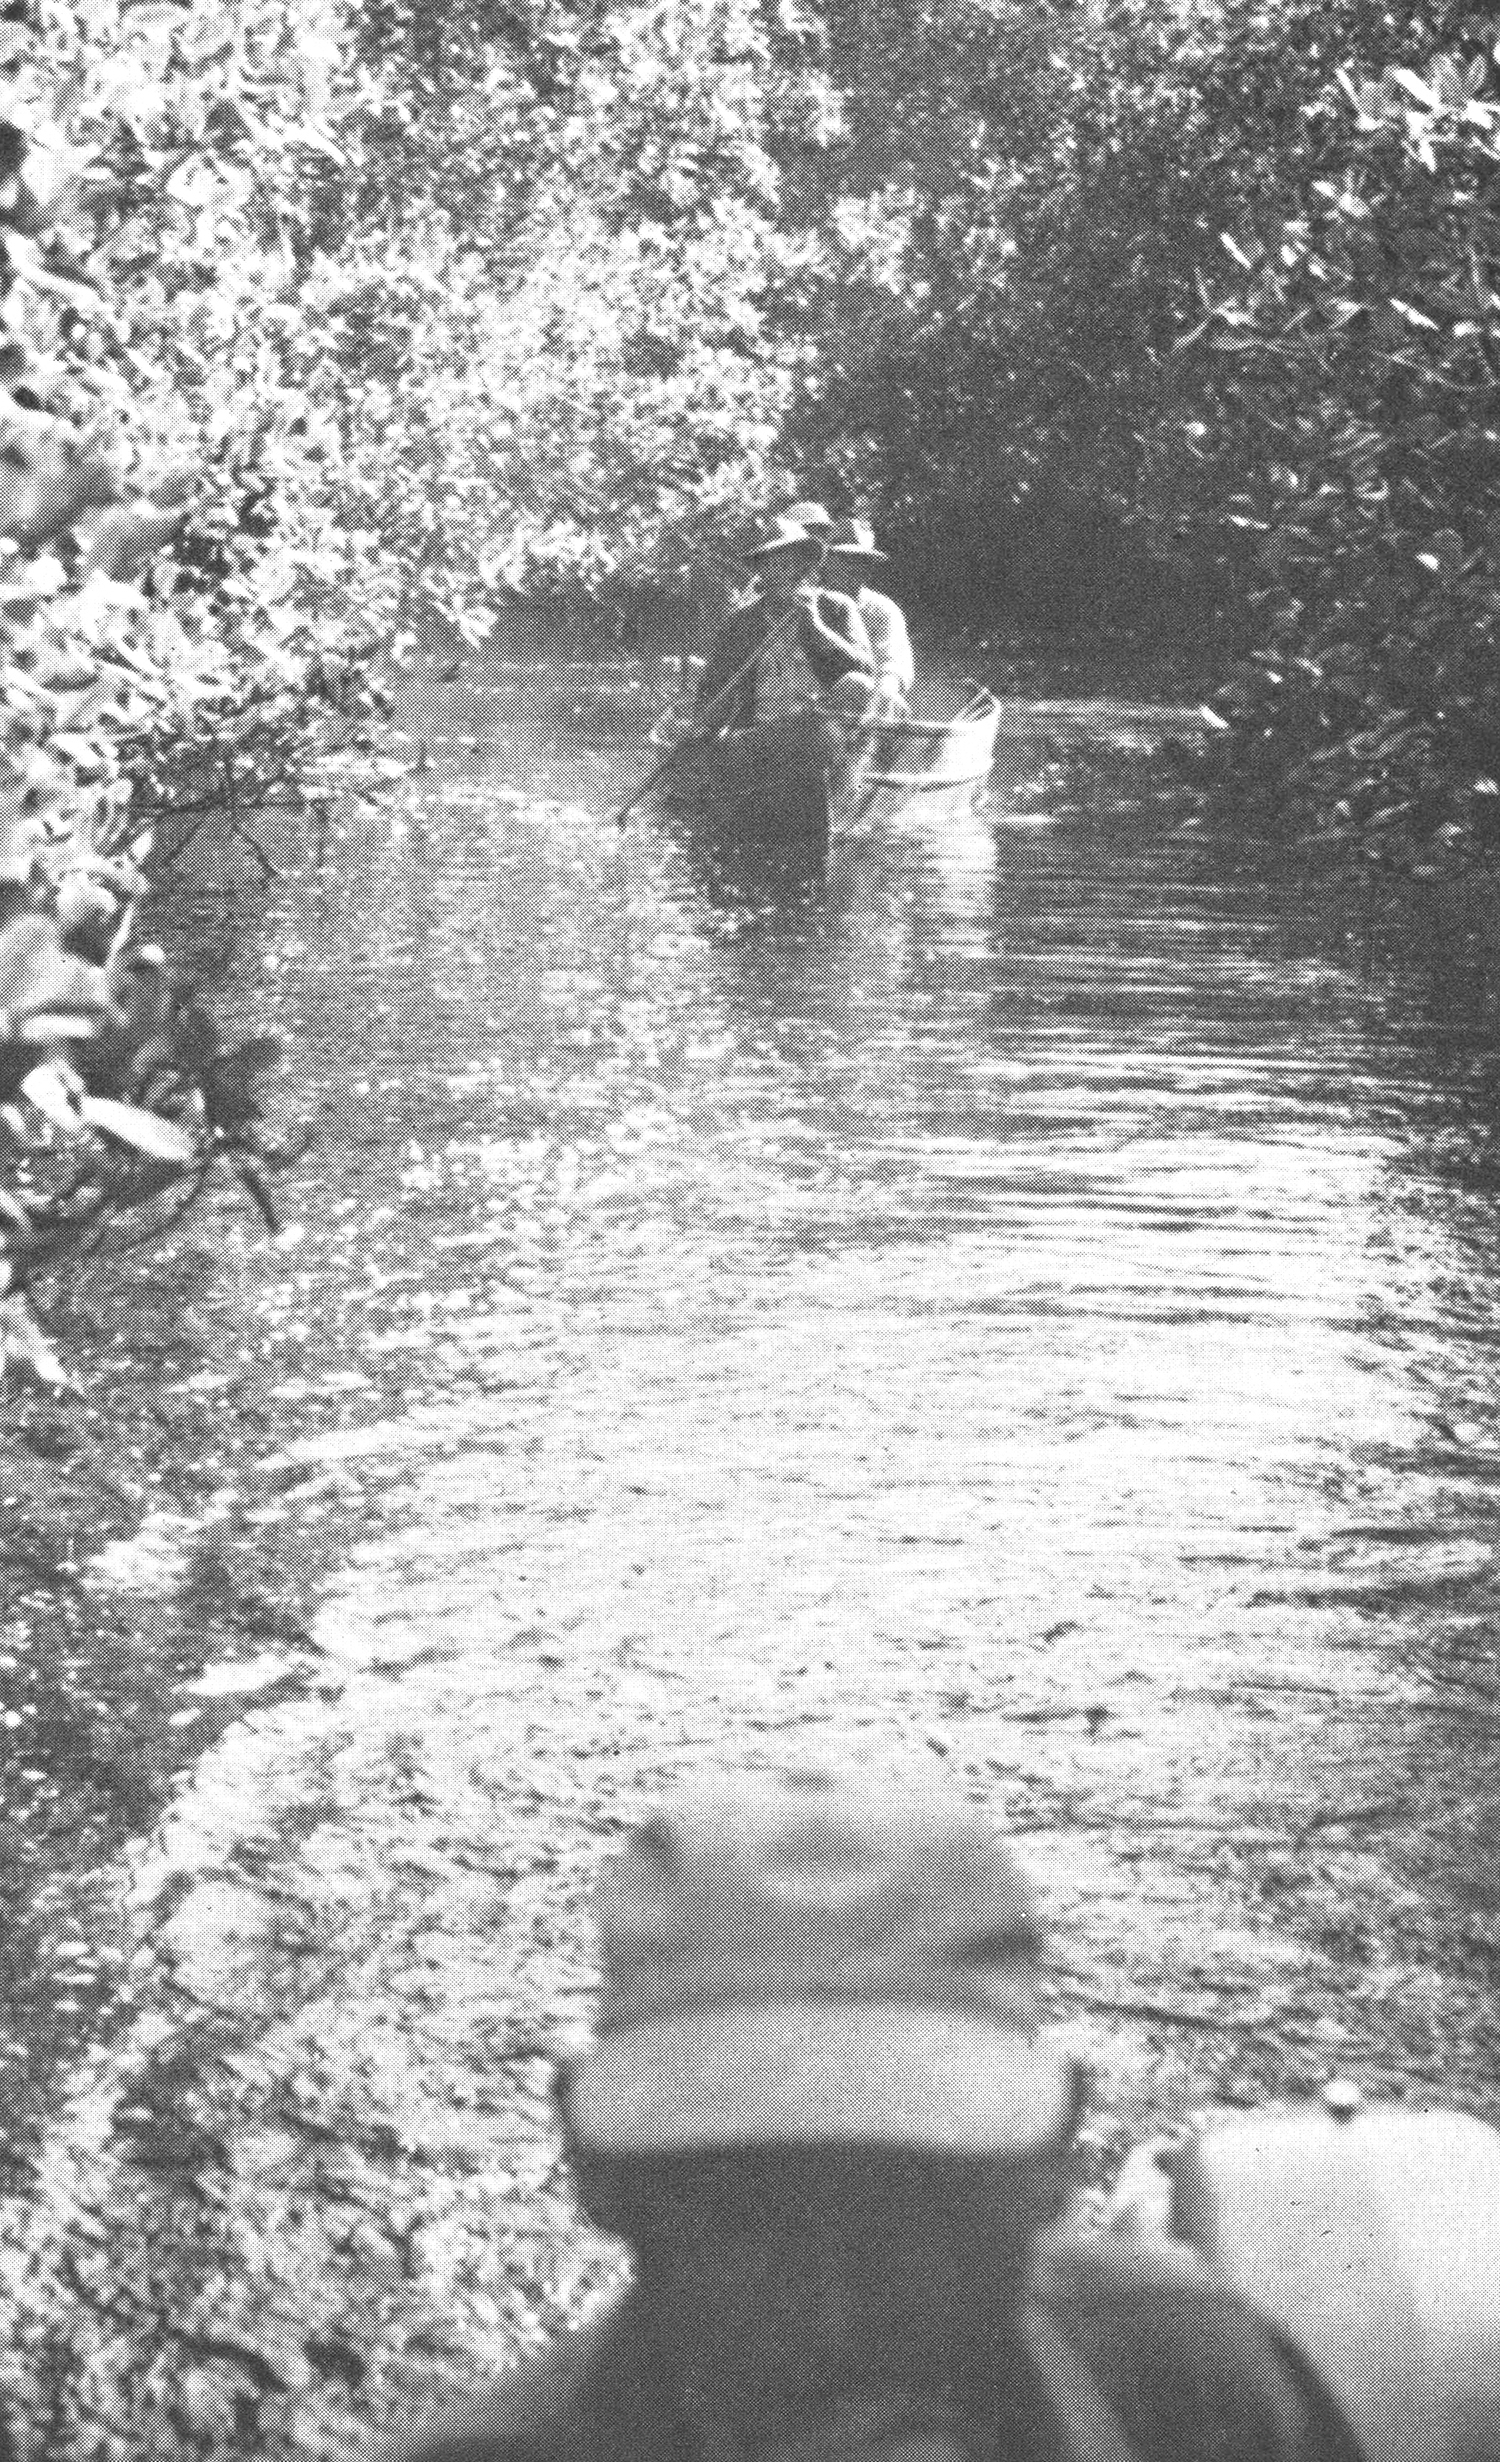 three men in boat paddle behind first boat down a narrow waterway hemmed in by trees and overgrowth